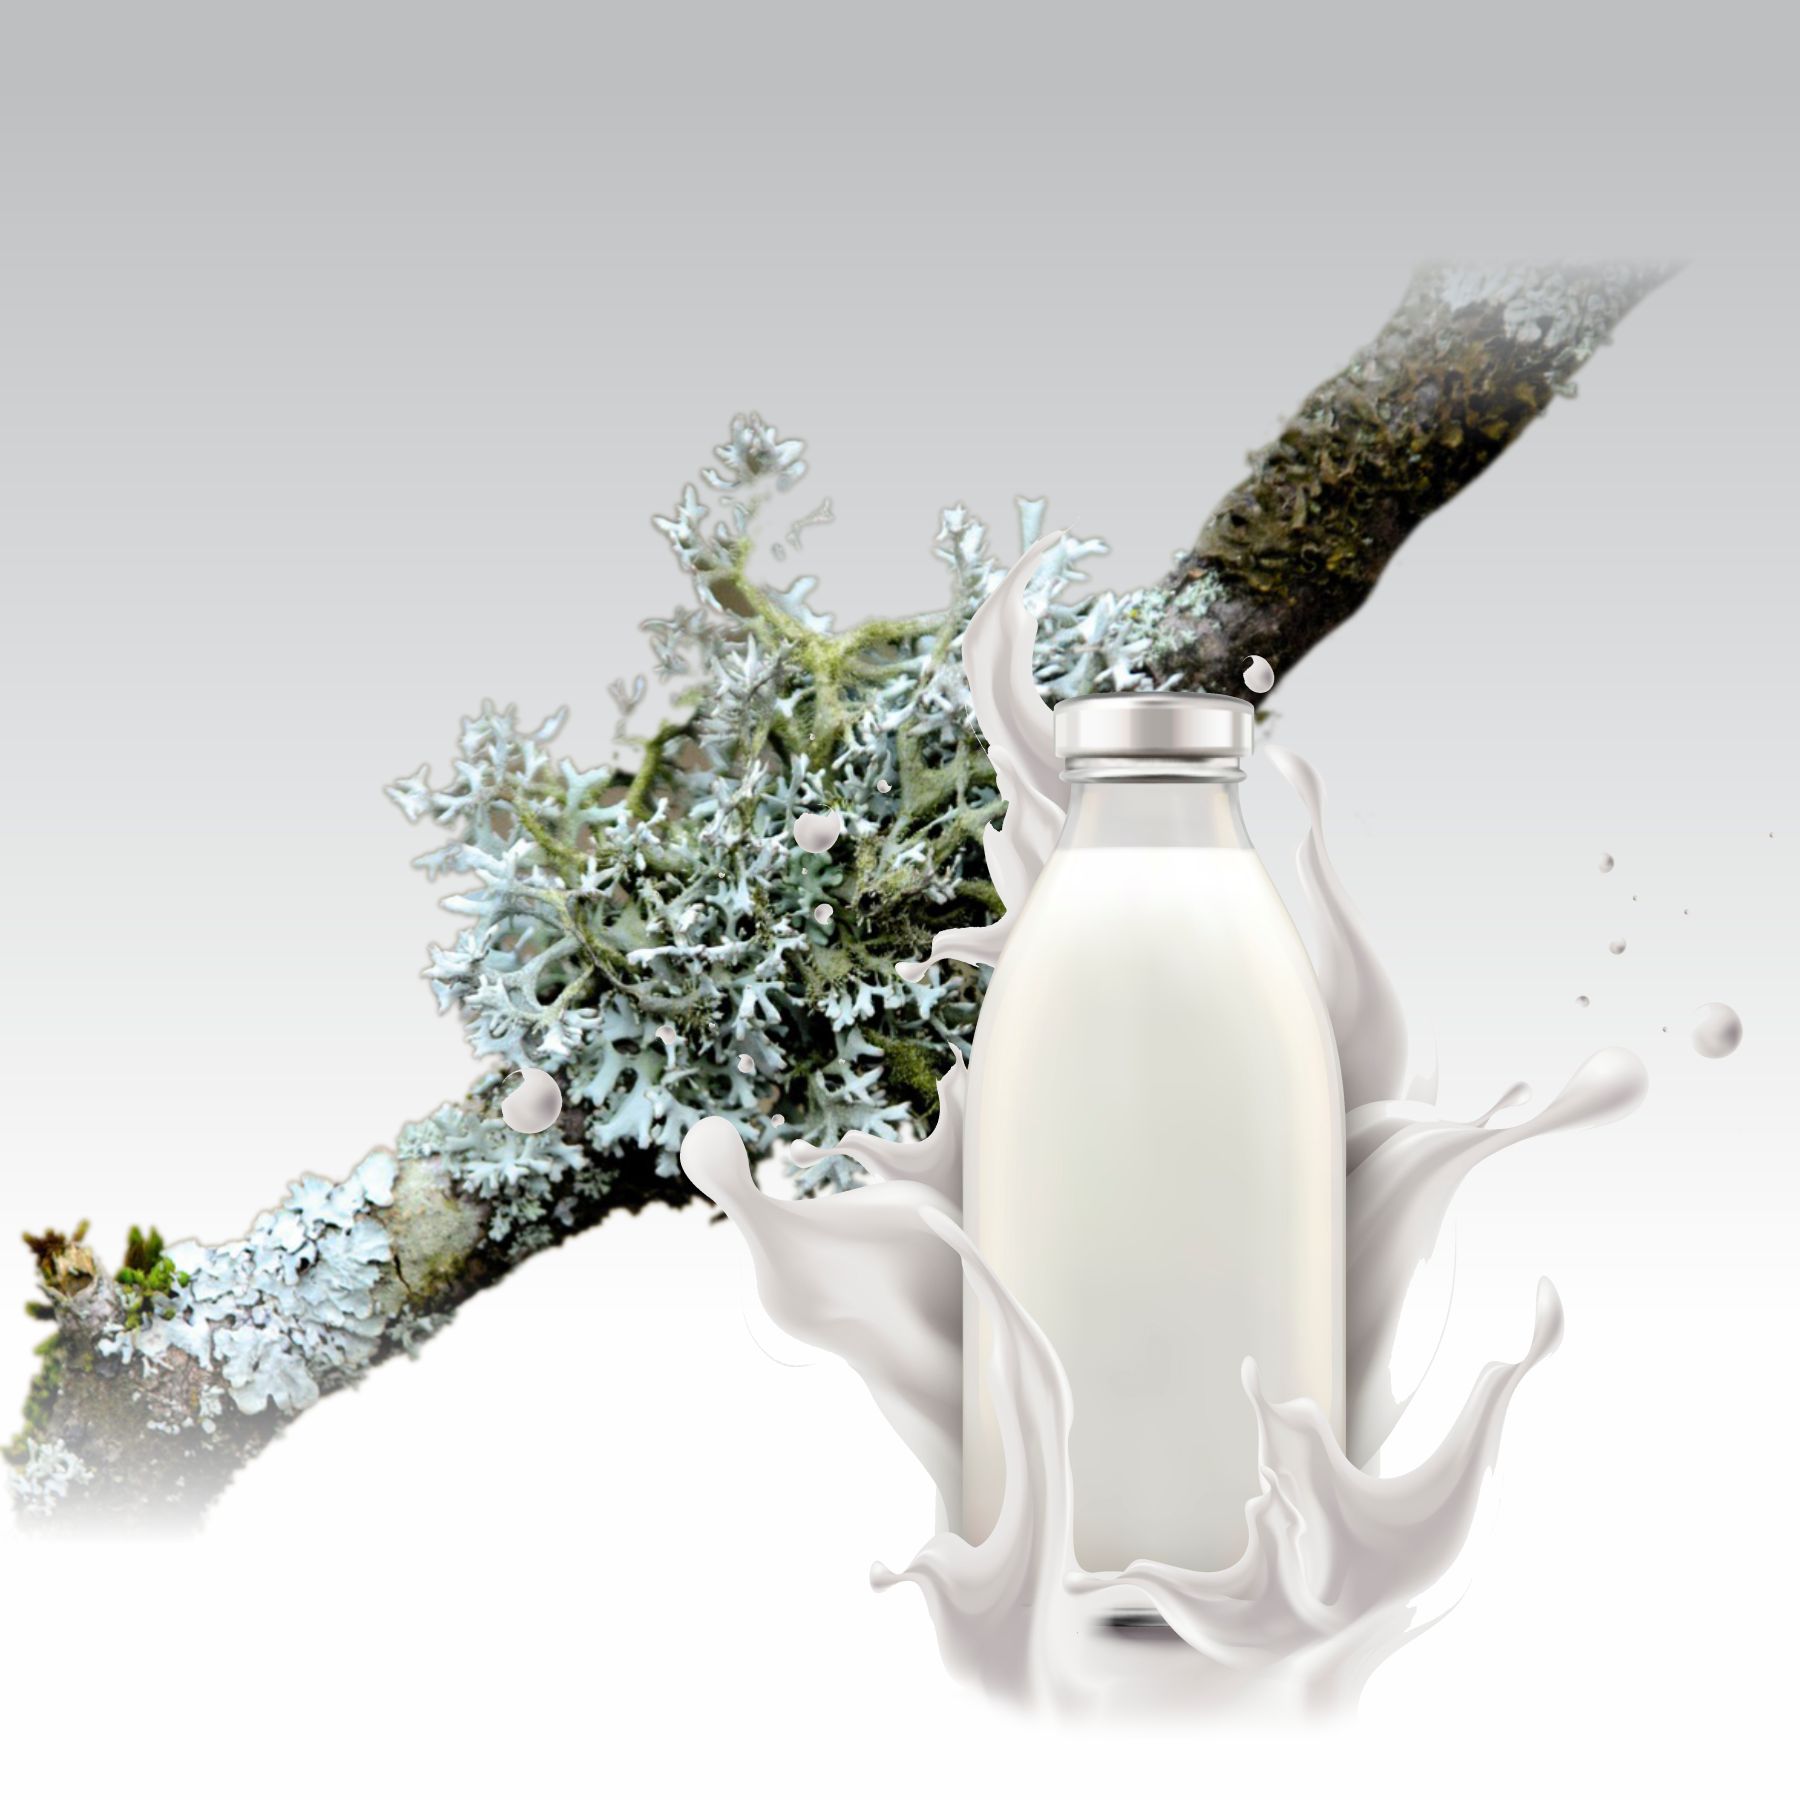 Milk glass enriched with Vitamin D